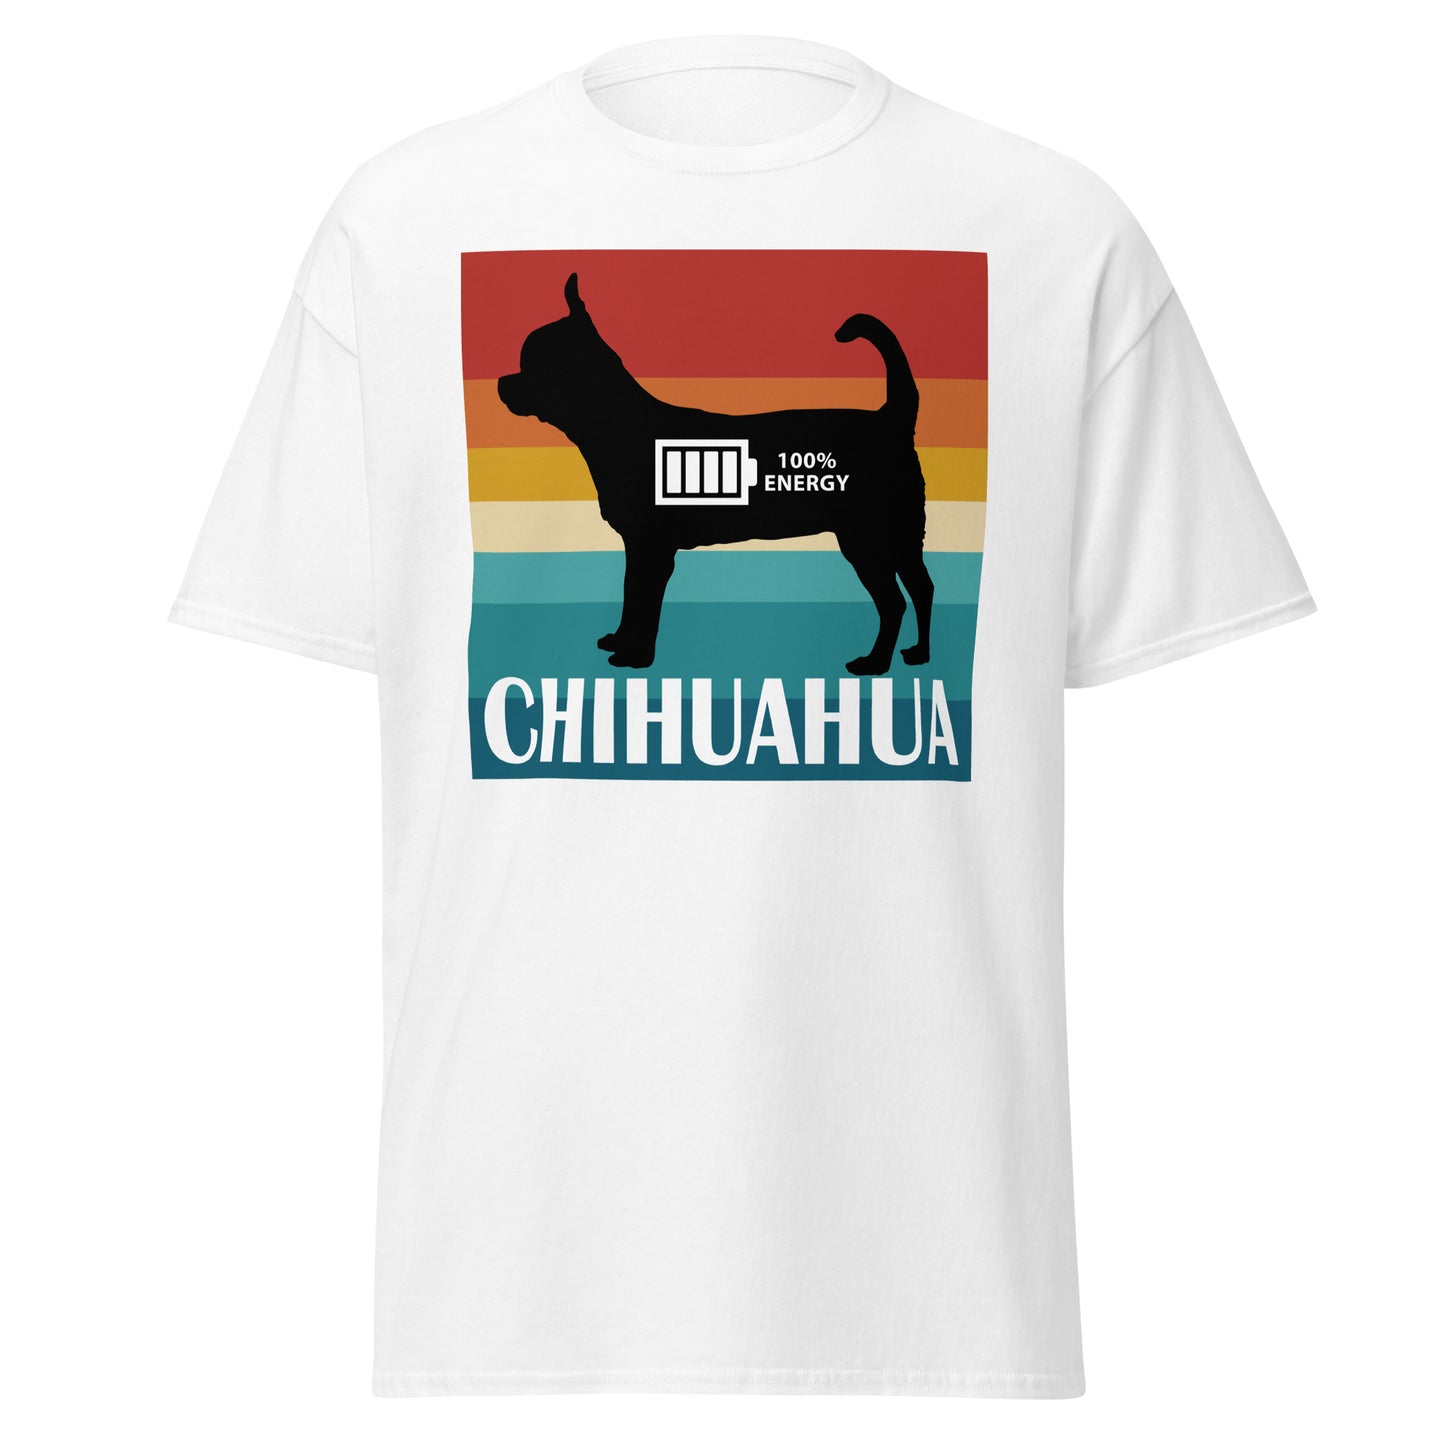 Chihuahua 100% Energy Men's classic tee by Dog Artistry